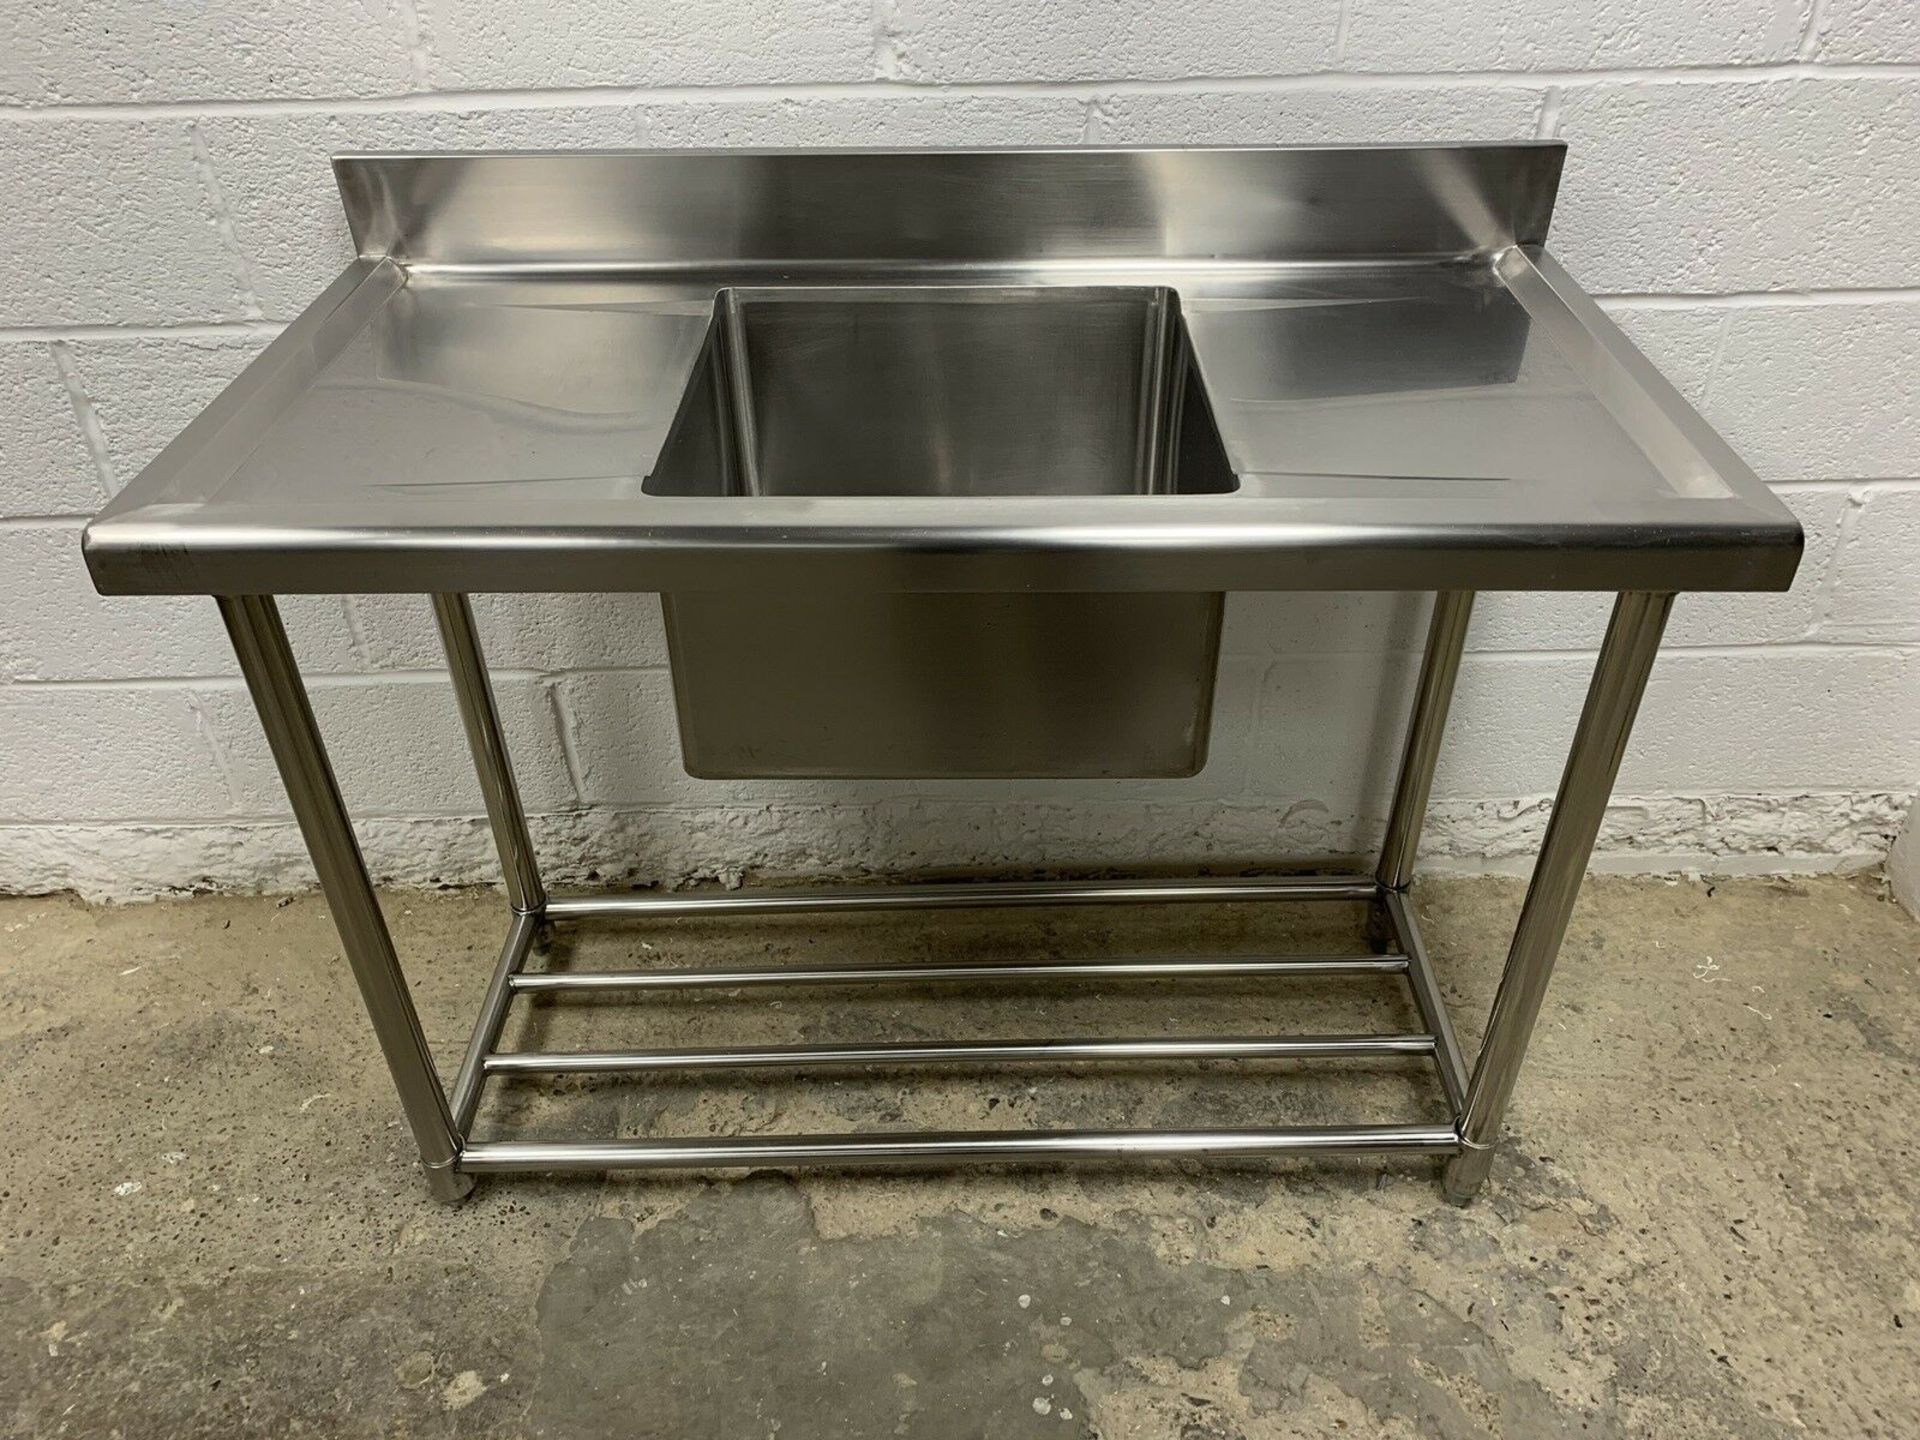 Stainless Steel Commercial Single Bowl Sink With Double Drainer - Image 5 of 6